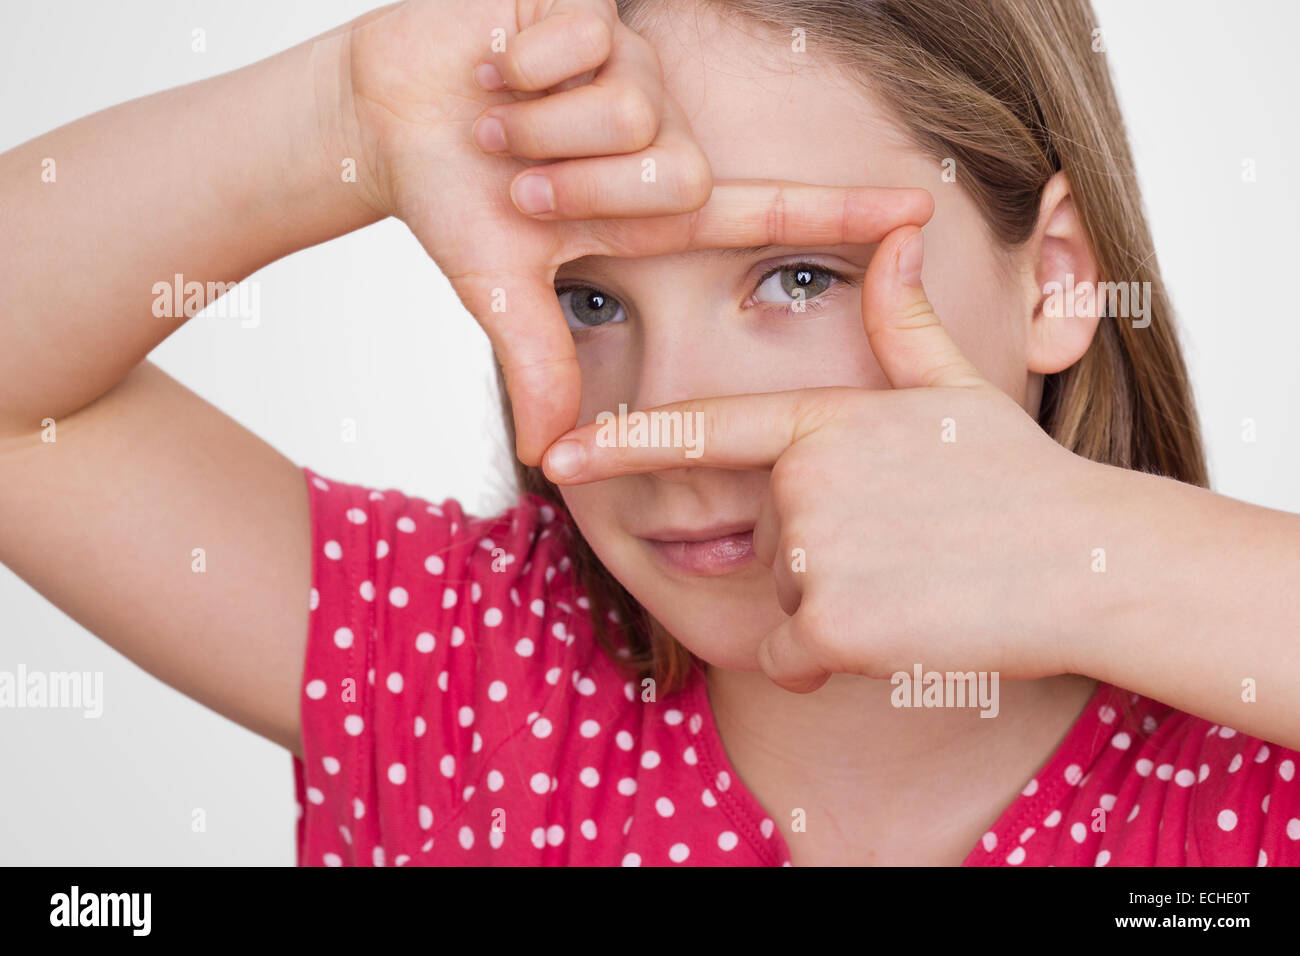 A girl looking with hands a picture Section Stock Photo